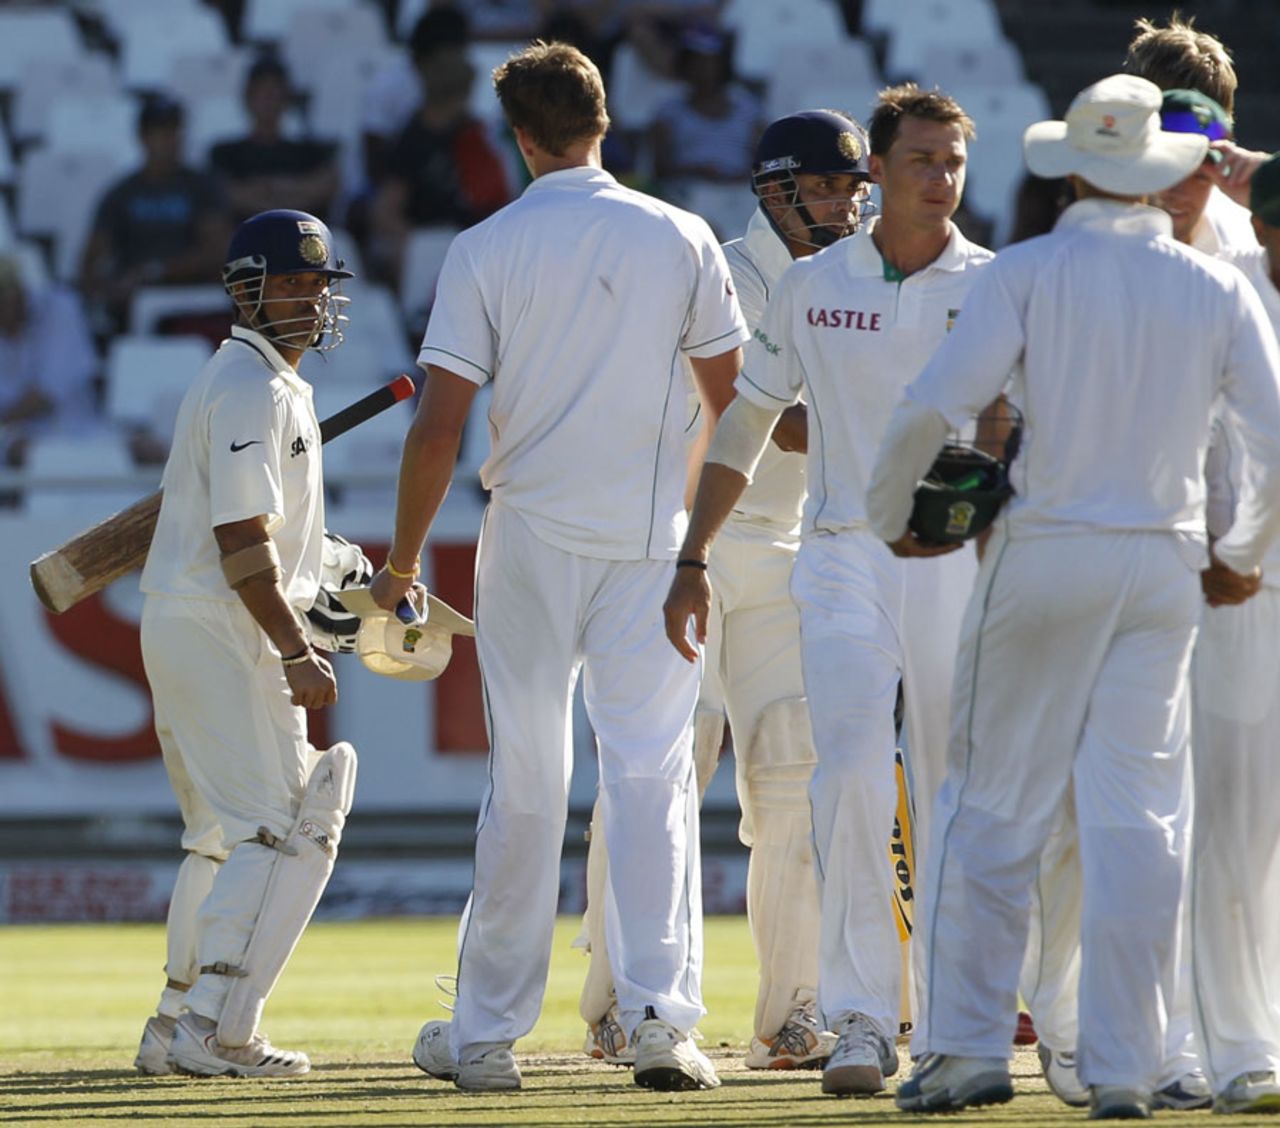 The players decide to go off, leaving the series tied 1-1, South Africa v India, 3rd Test, Cape Town, 5th day, January 6, 2011